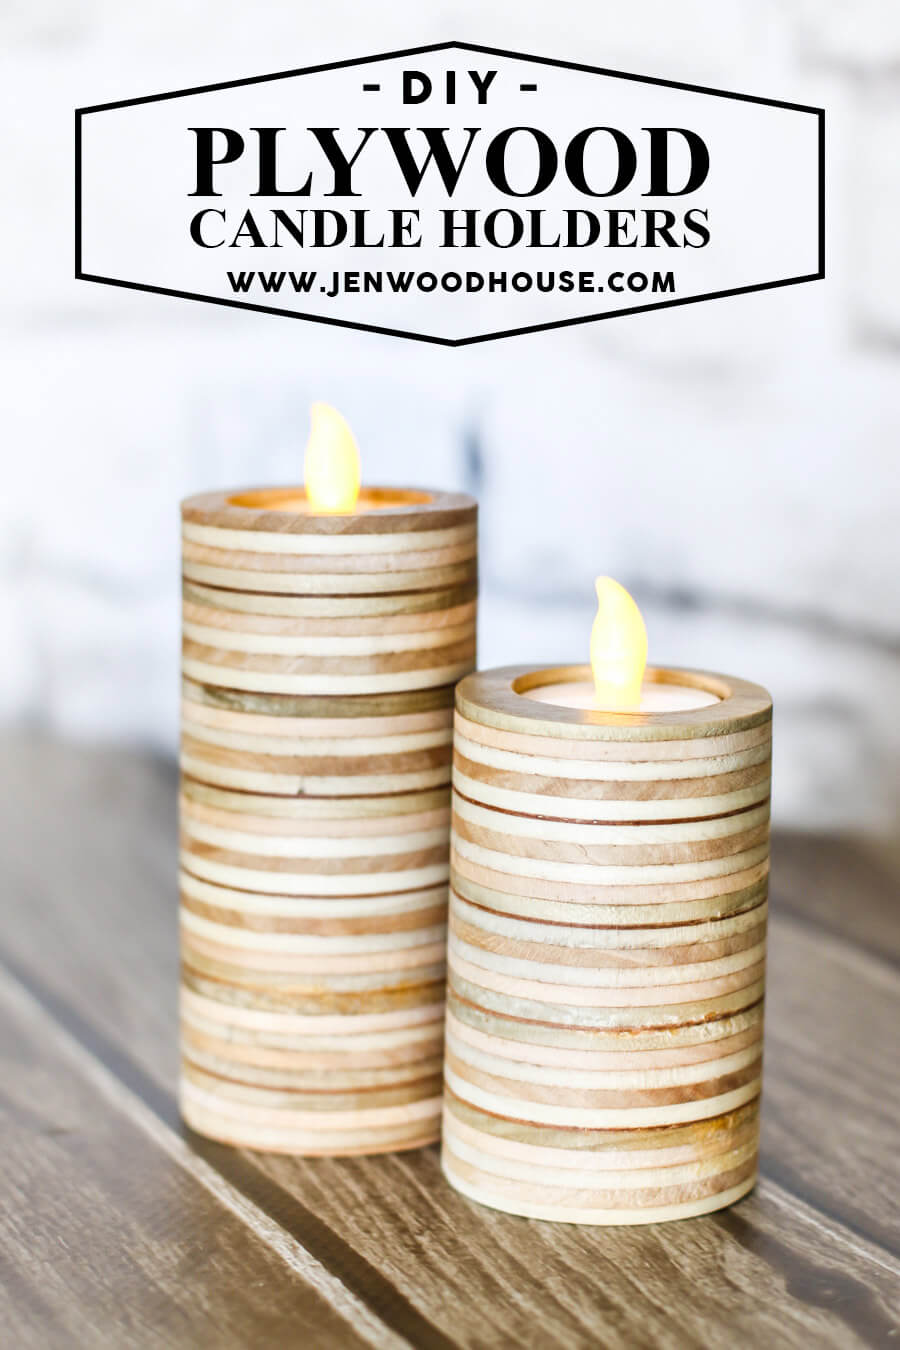 Plywood Candle Holders